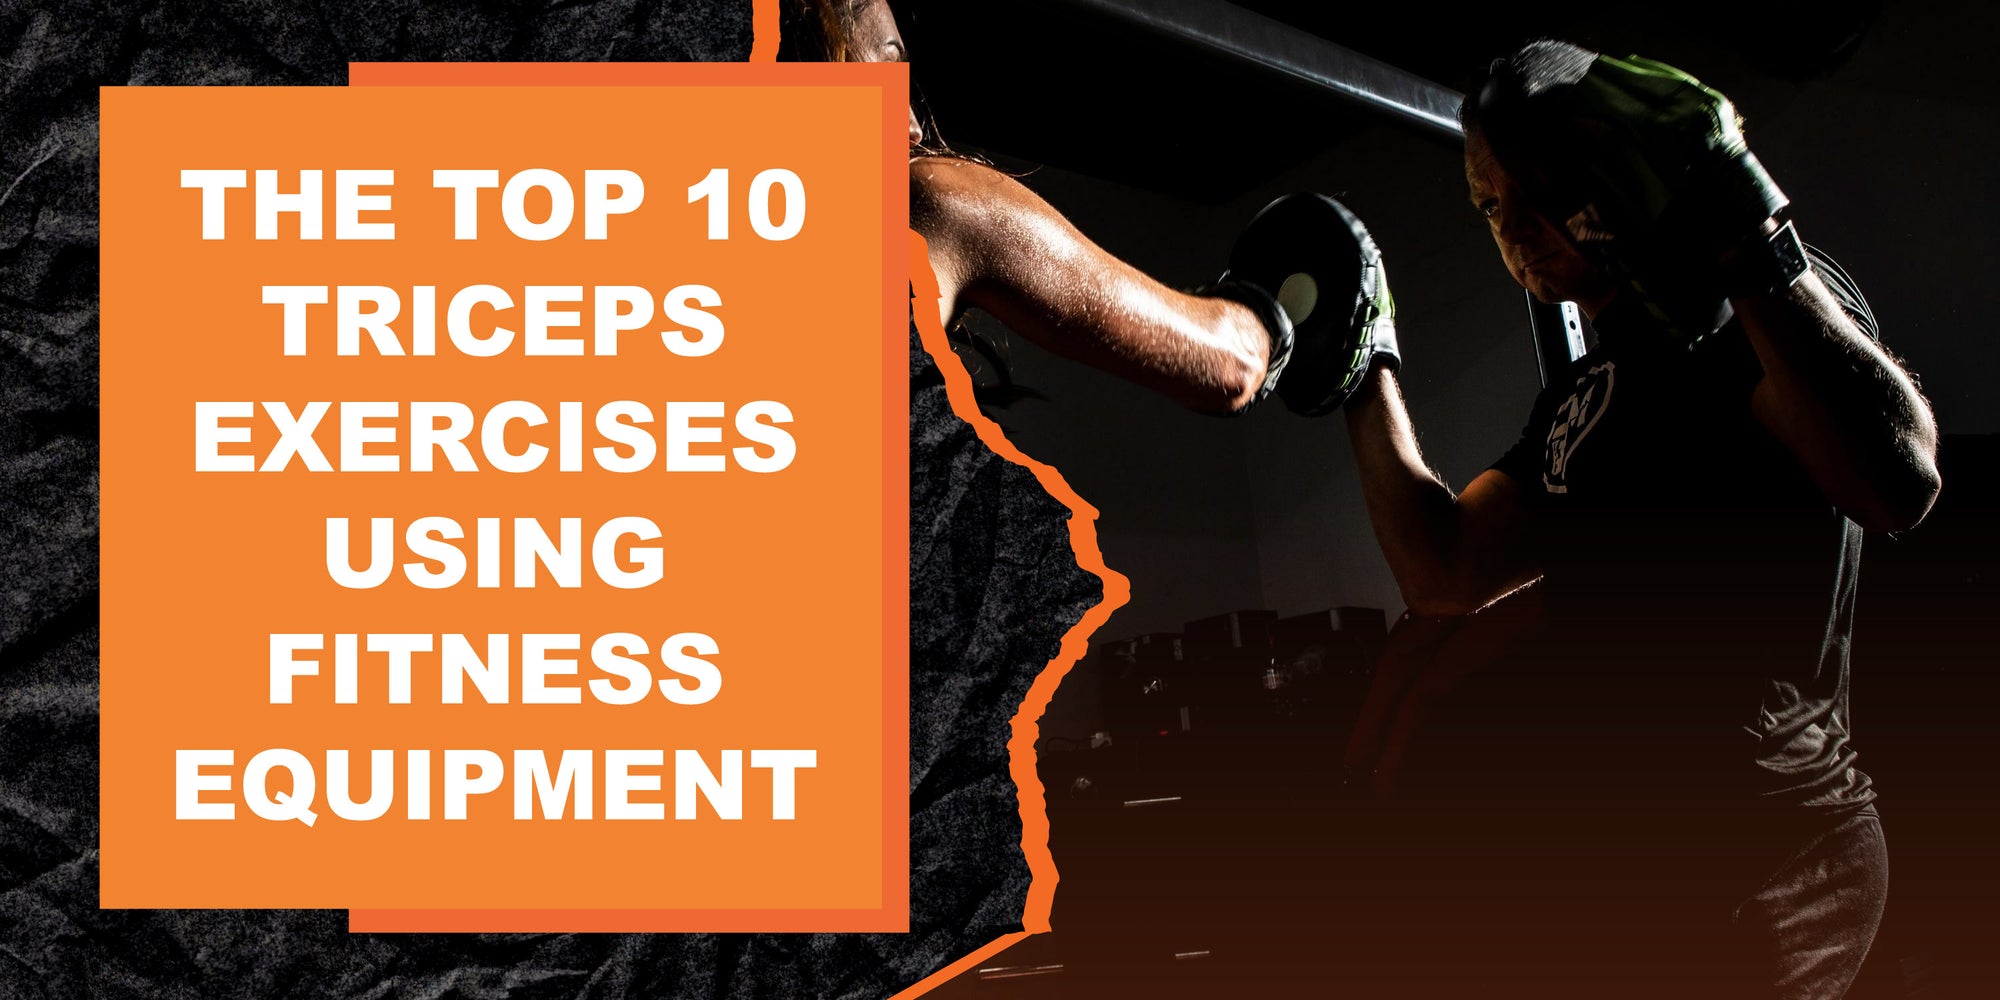 The Top 10 Triceps Exercises Using Fitness Equipment